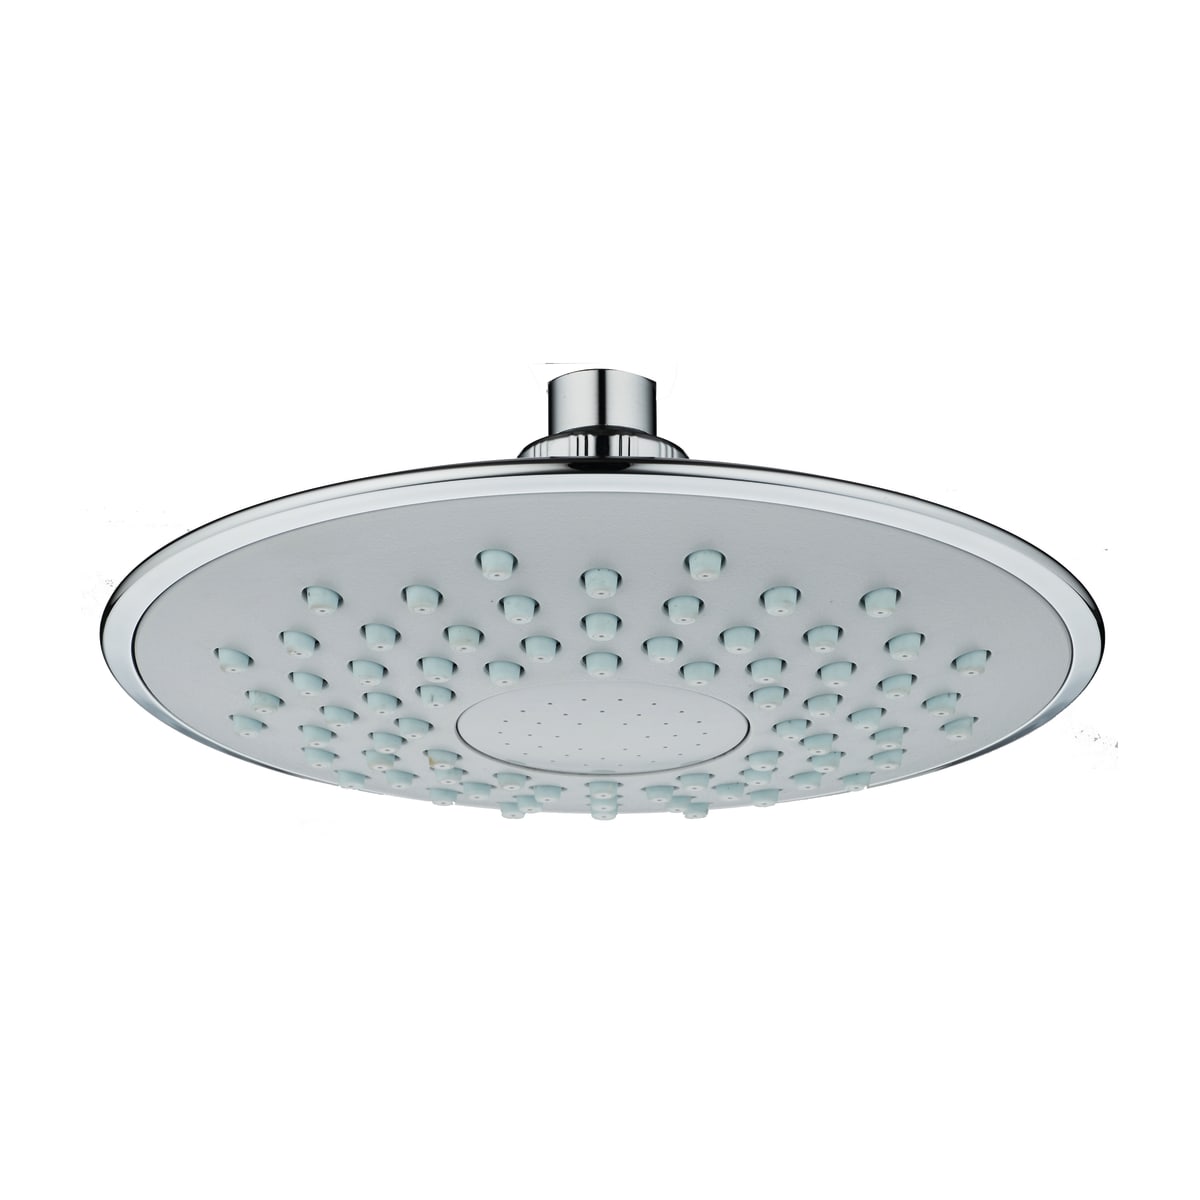 TUINA SHOWER HEAD IN ABS DIA CM 20